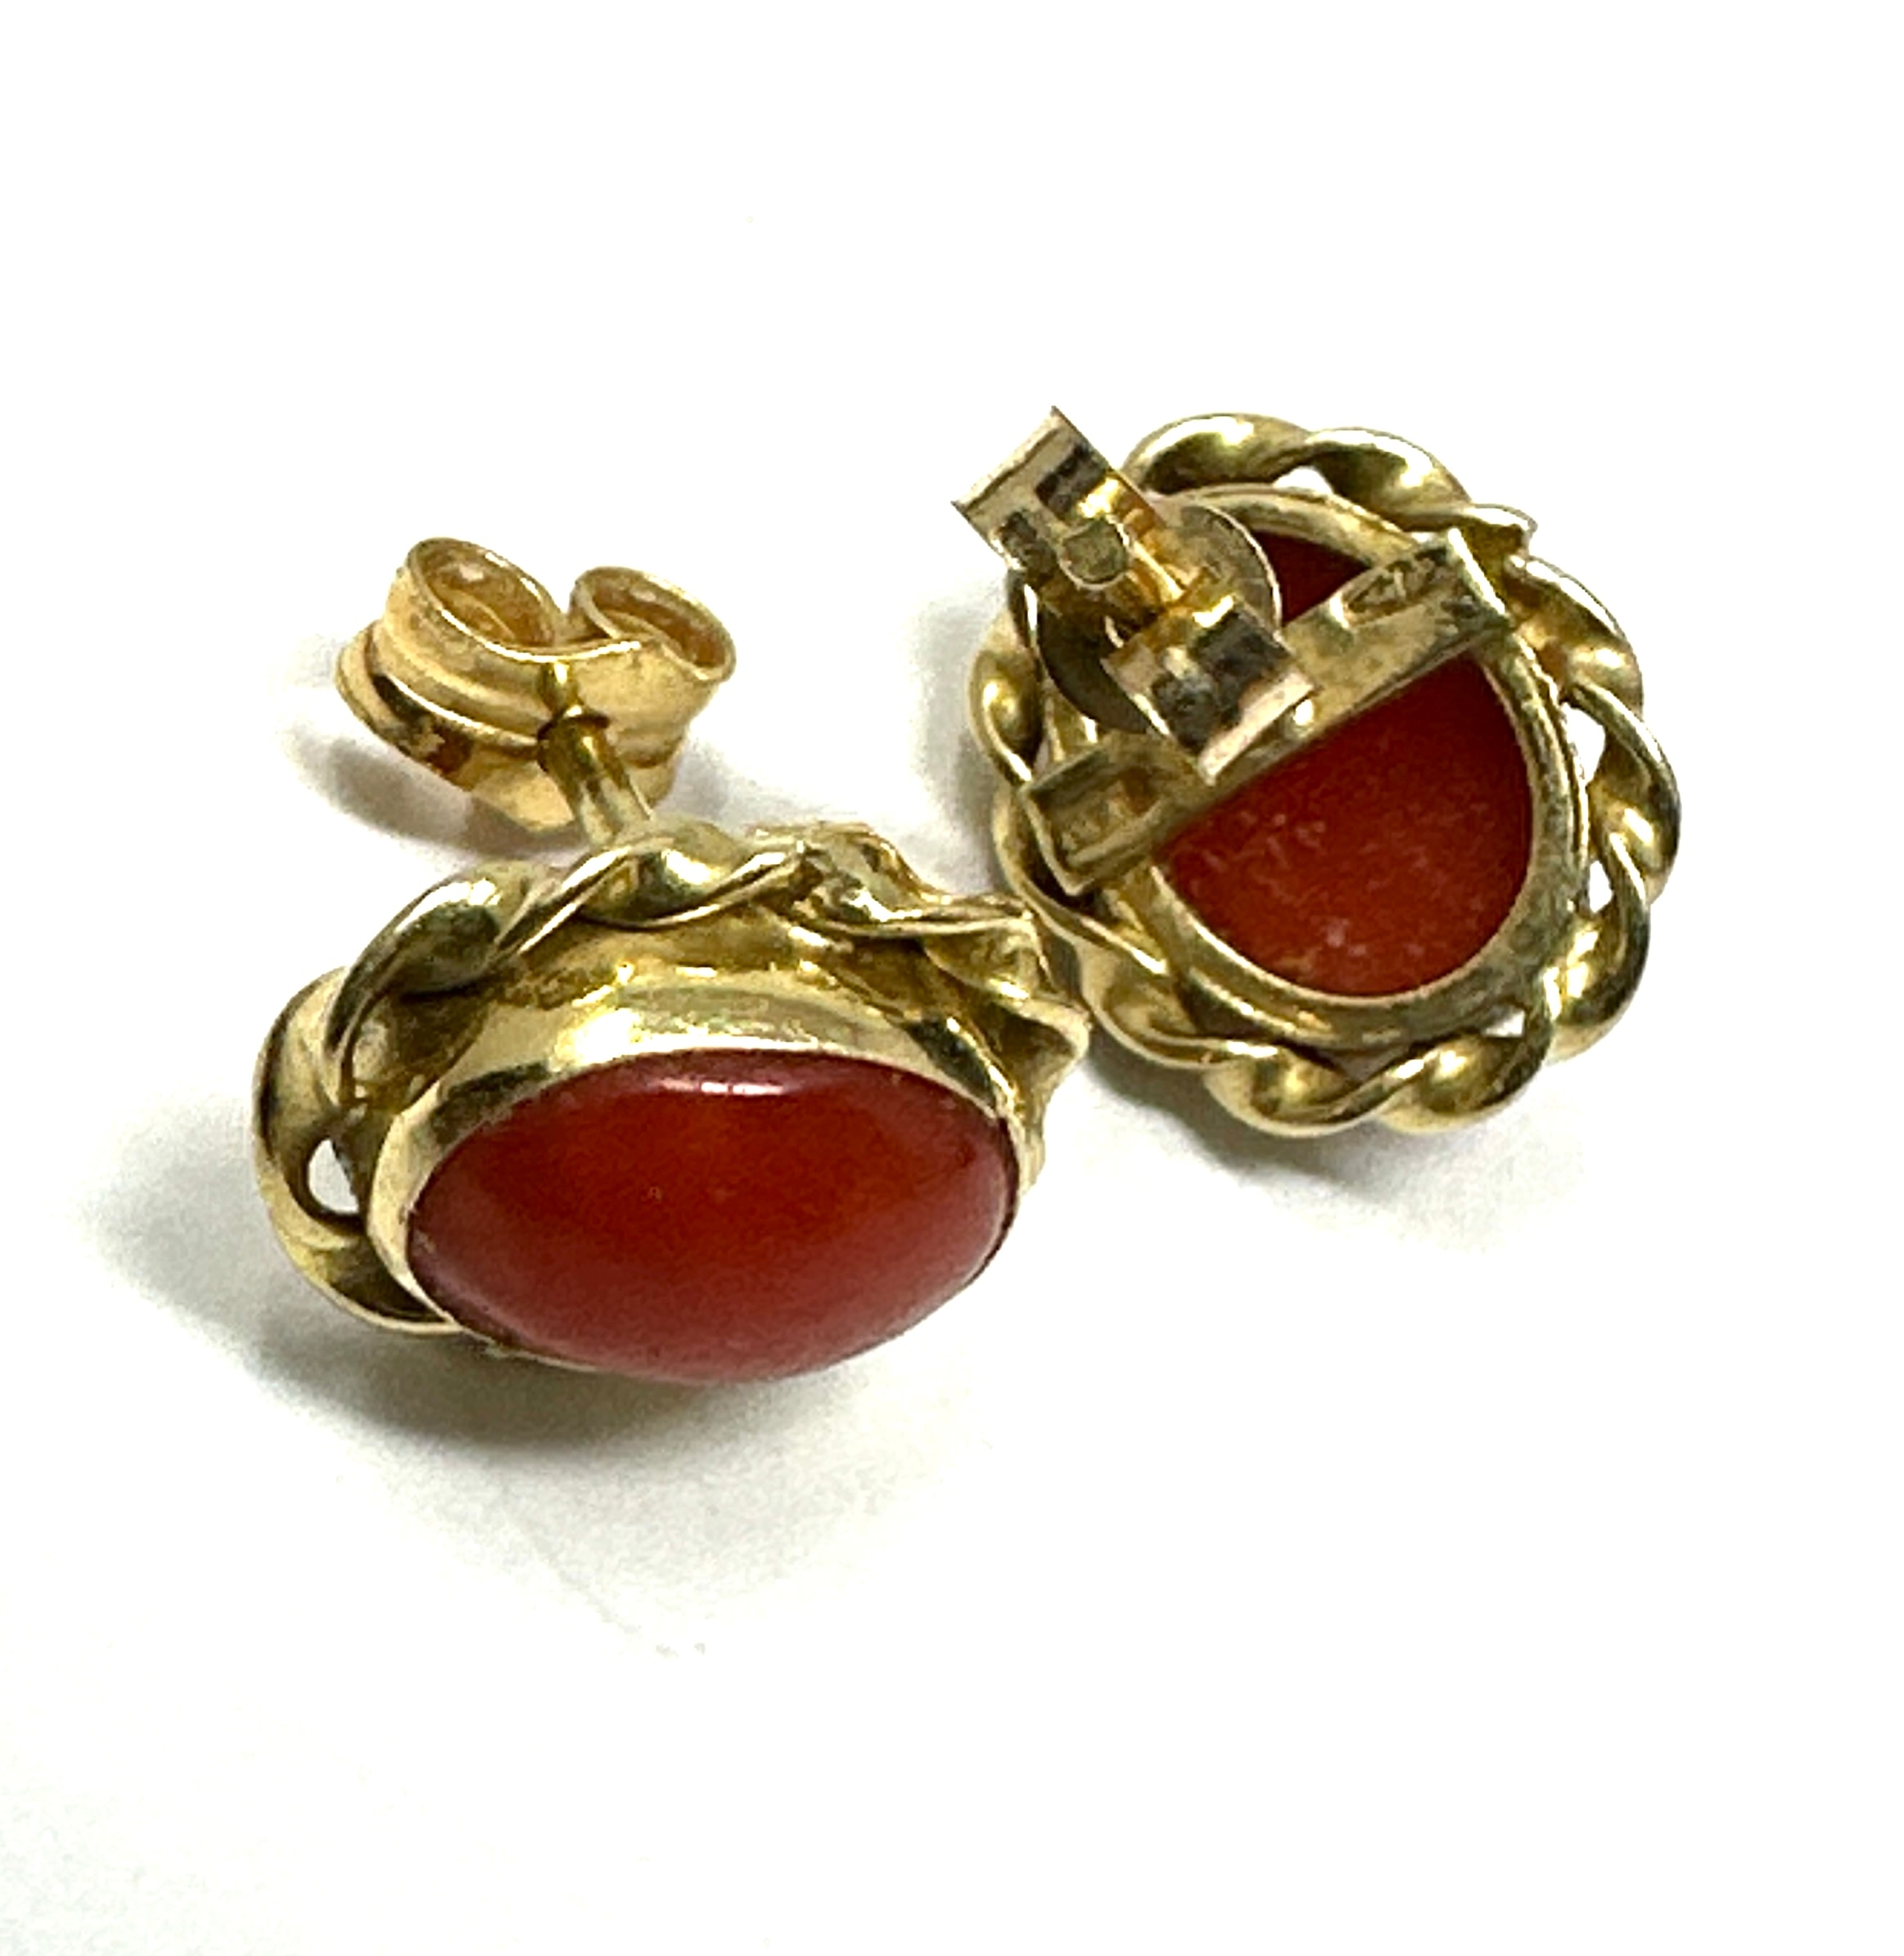 18ct gold coral earrings weight 2.5g - Image 3 of 3